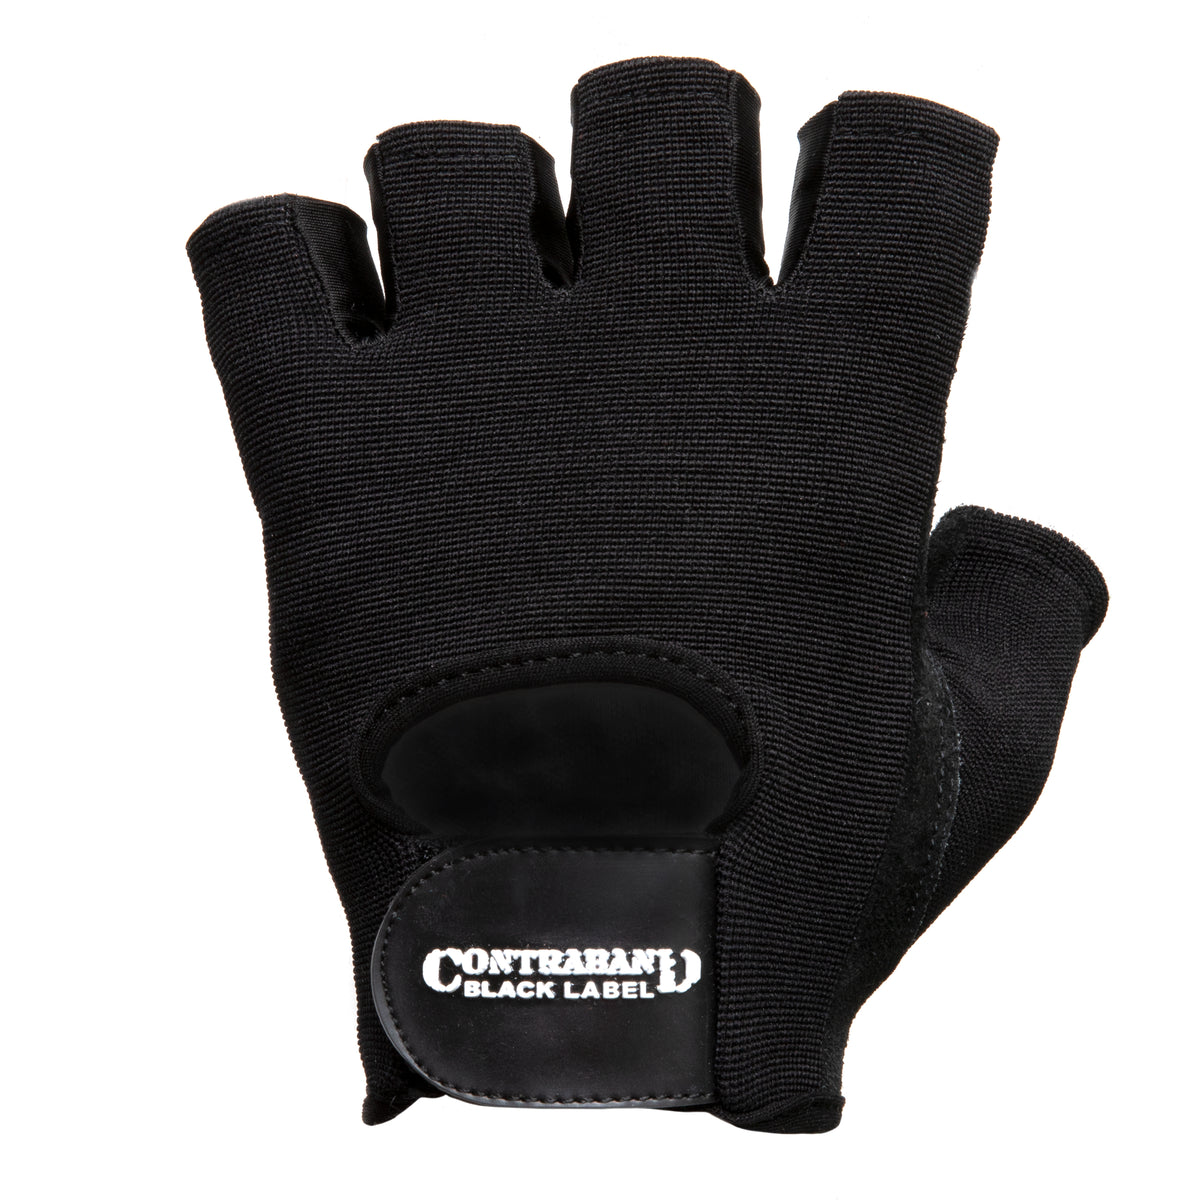 Contraband Black Label 5450 Heavy Duty Double Layer Gel Padded Leather Weight Lifting Gloves